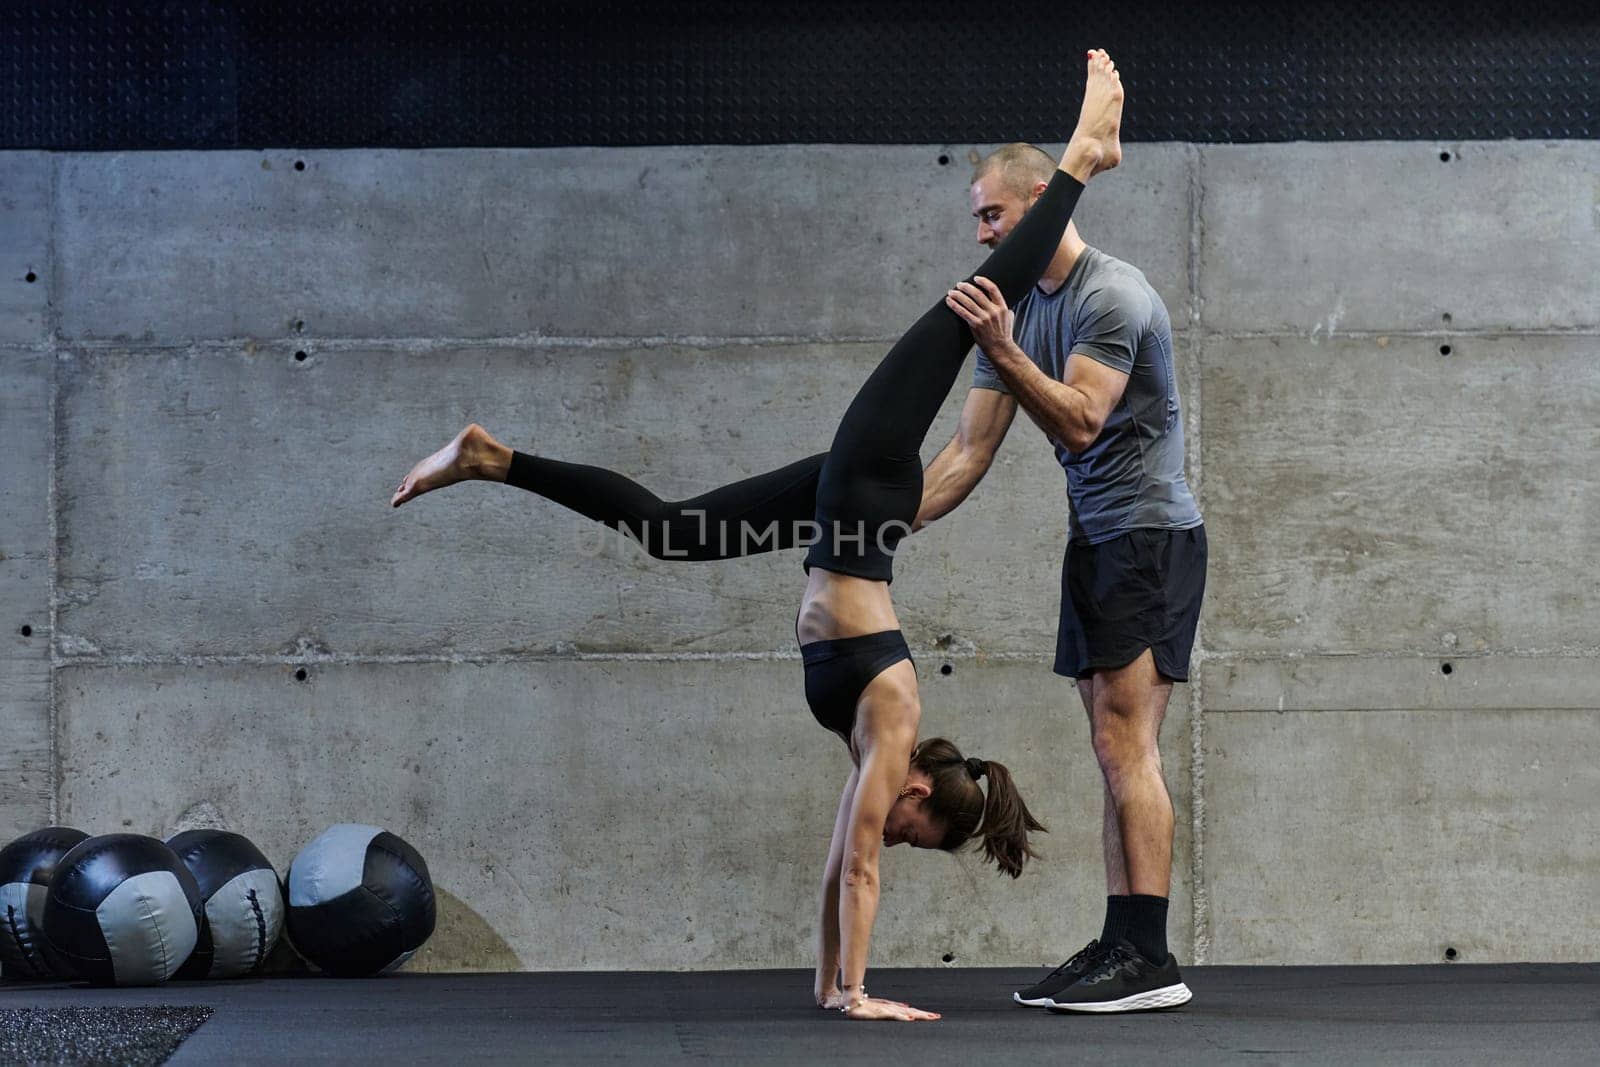 A muscular man assisting a fit woman in a modern gym as they engage in various body exercises and muscle stretches, showcasing their dedication to fitness and benefiting from teamwork and support by dotshock